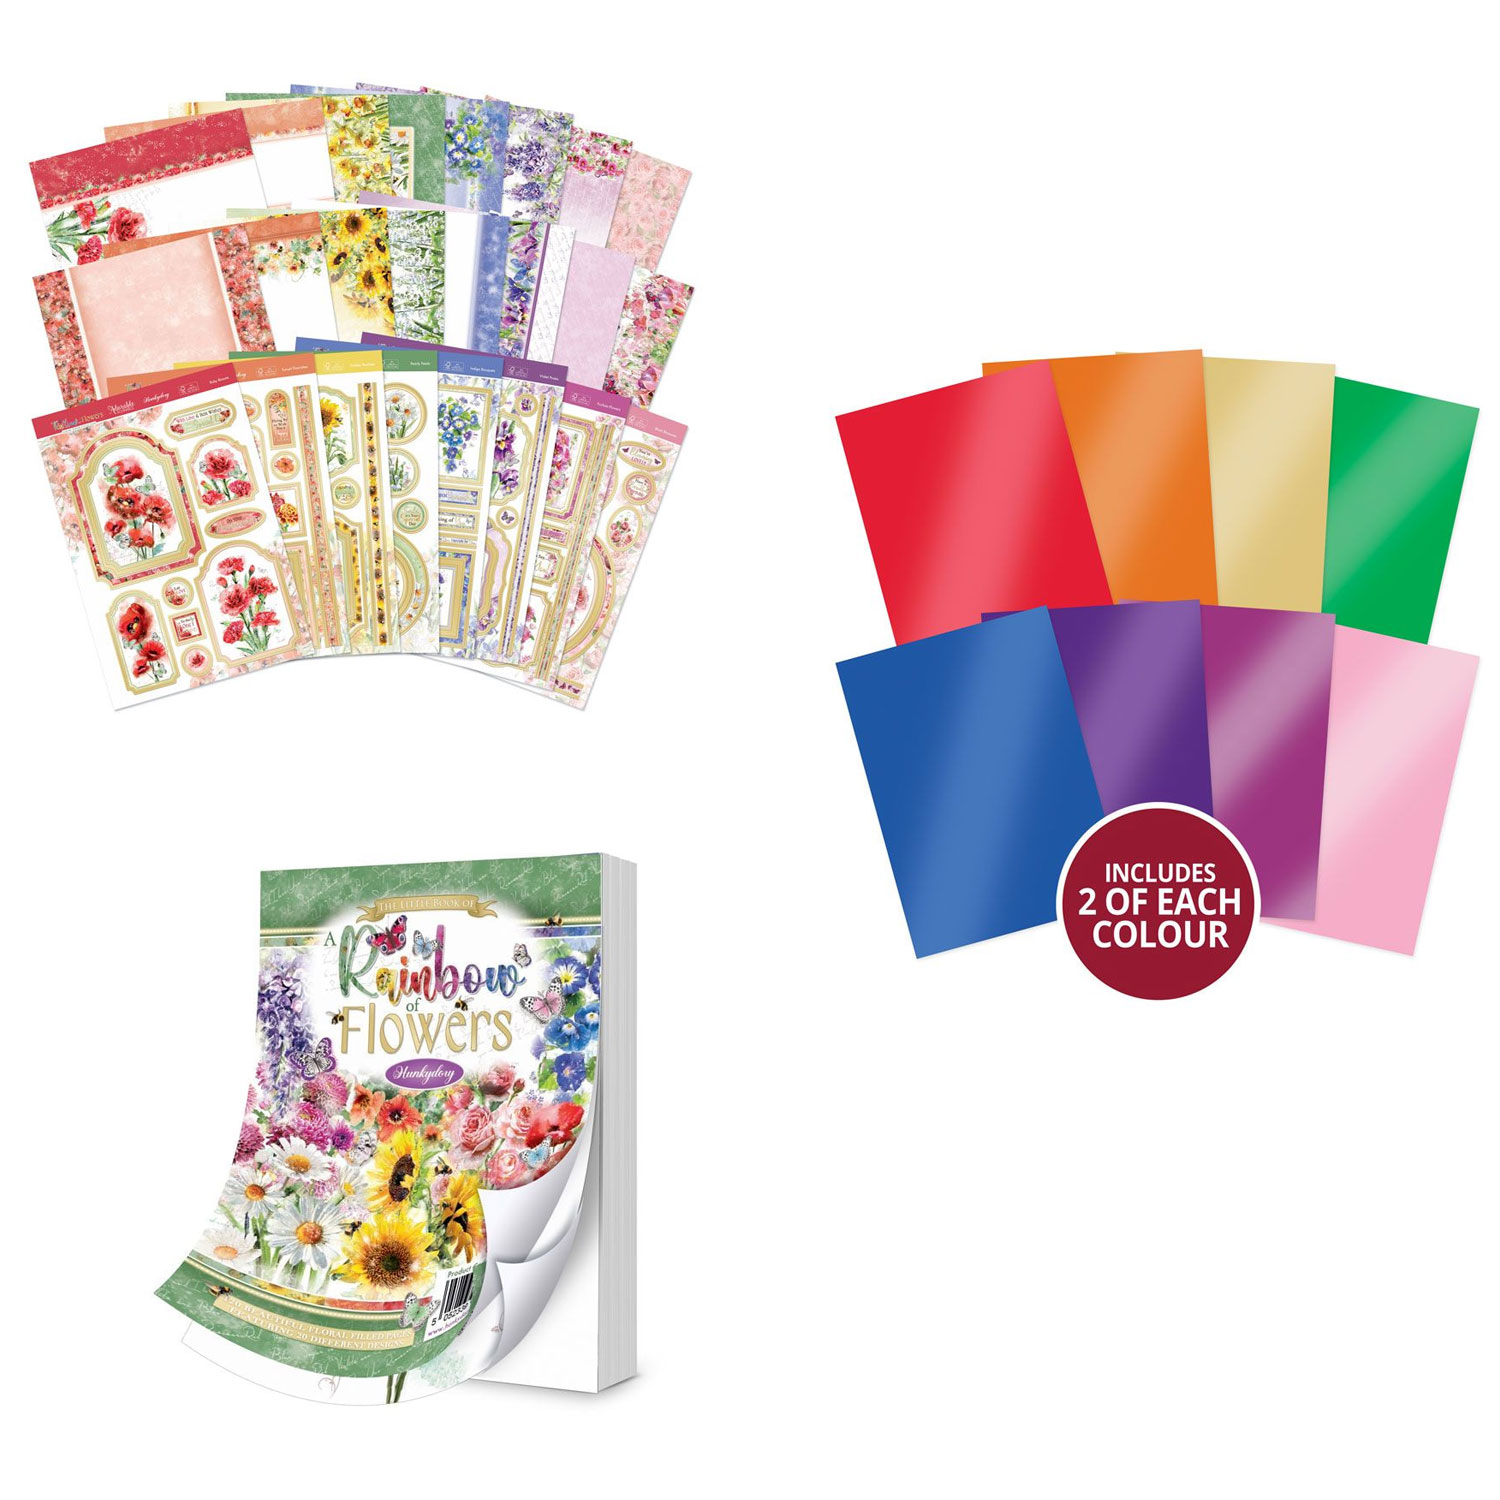 Paper Wishes | Rainbow & Flowers by Hunkydory Money Saver